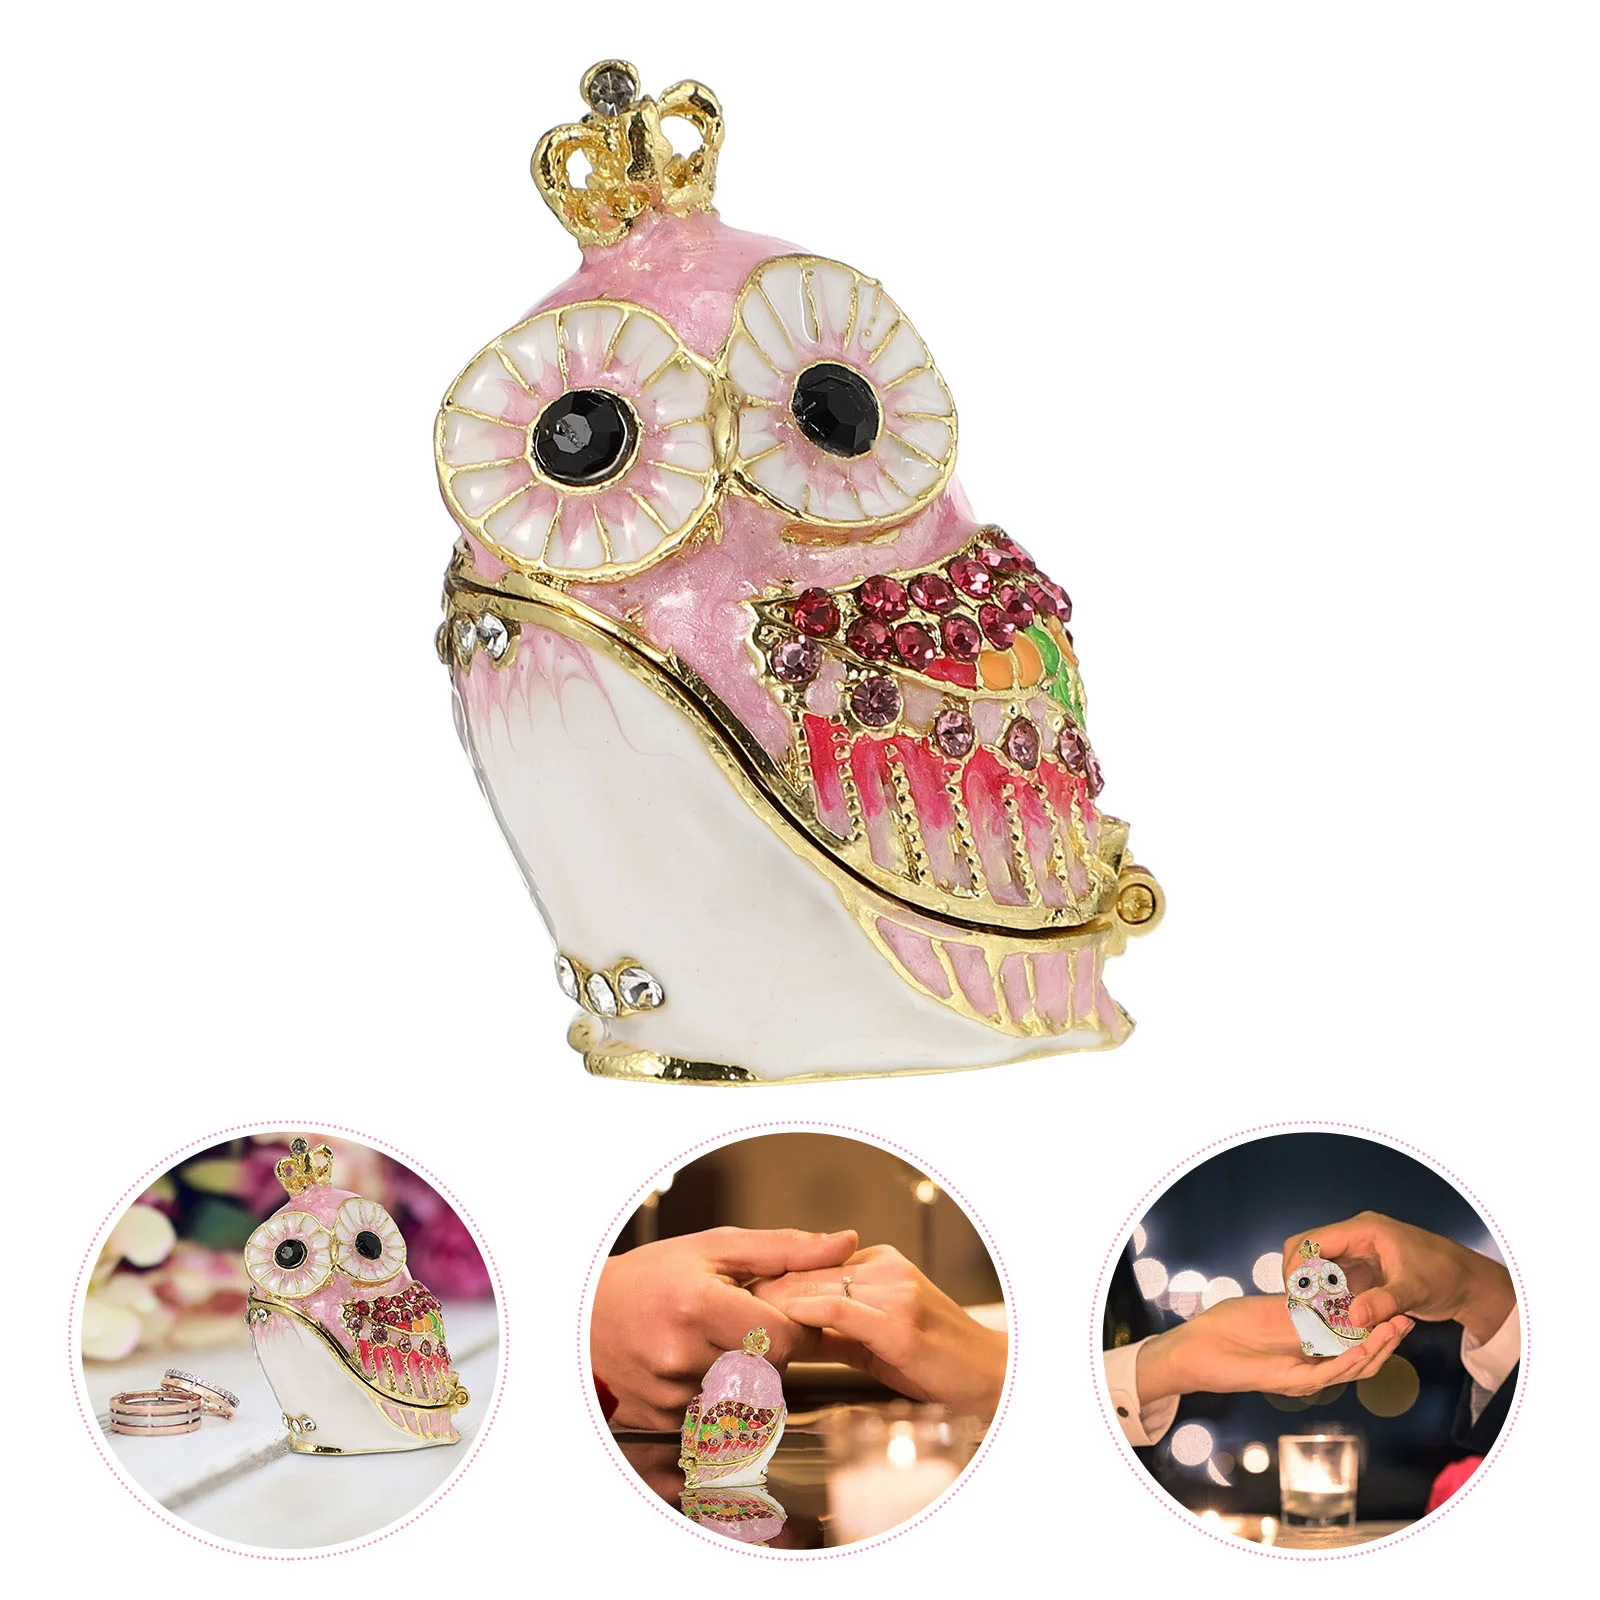 

Rhinestone Figurine Jewelry Box: Owl Statues Trinket Organizer for Necklace Earrings Small Trinket Container